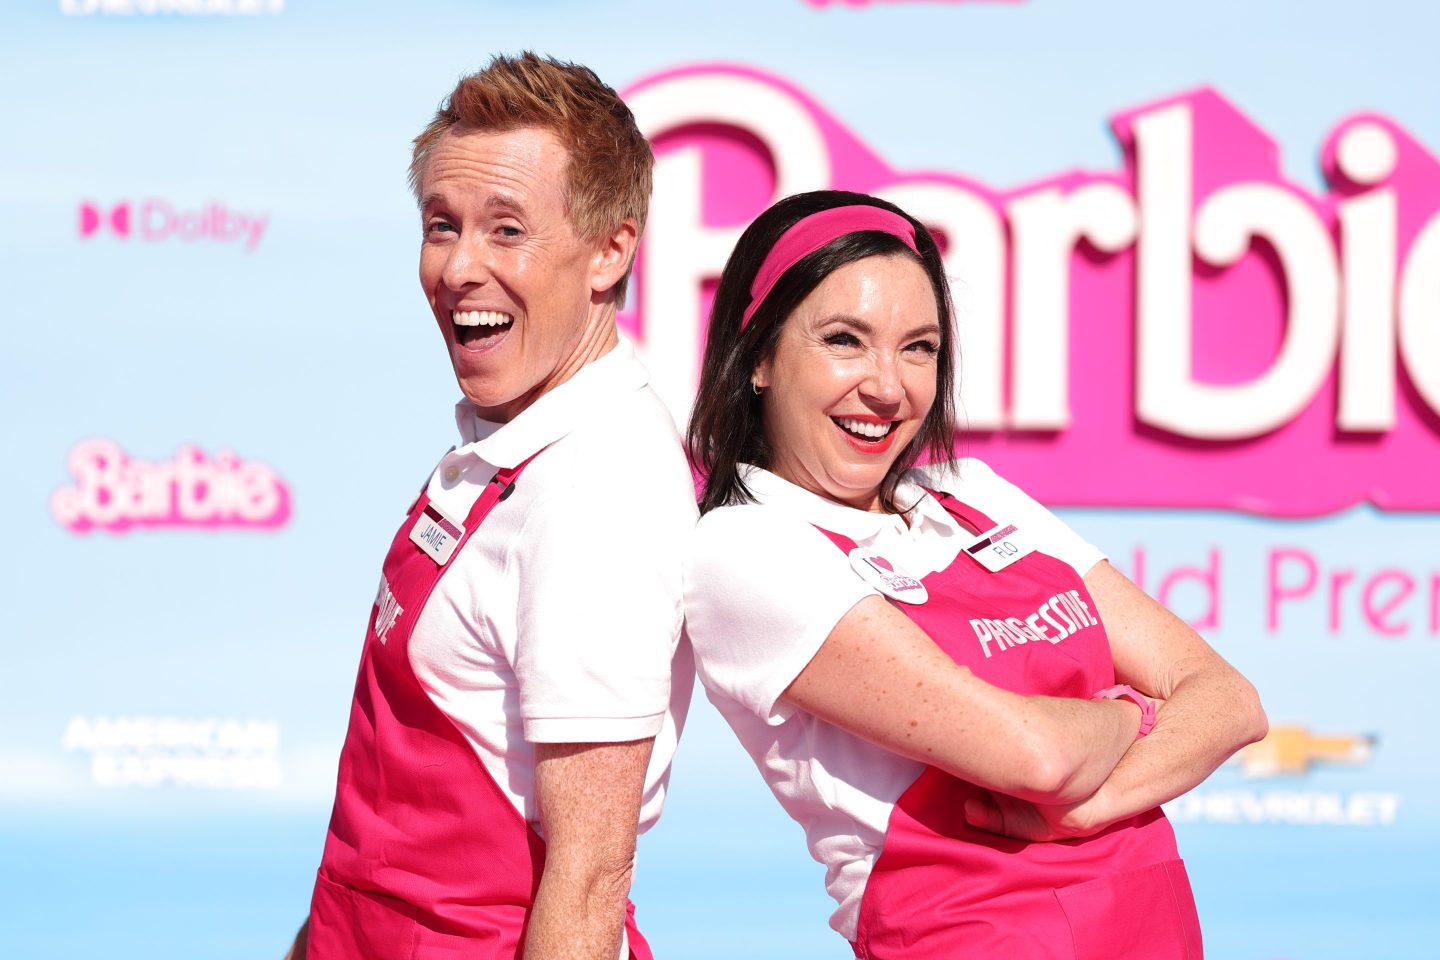 Jim Cashman (A.K.A. Jaime) and Stephanie Courtney (A.K.A. Flo) from Progressive at the premiere of the Barbie movie